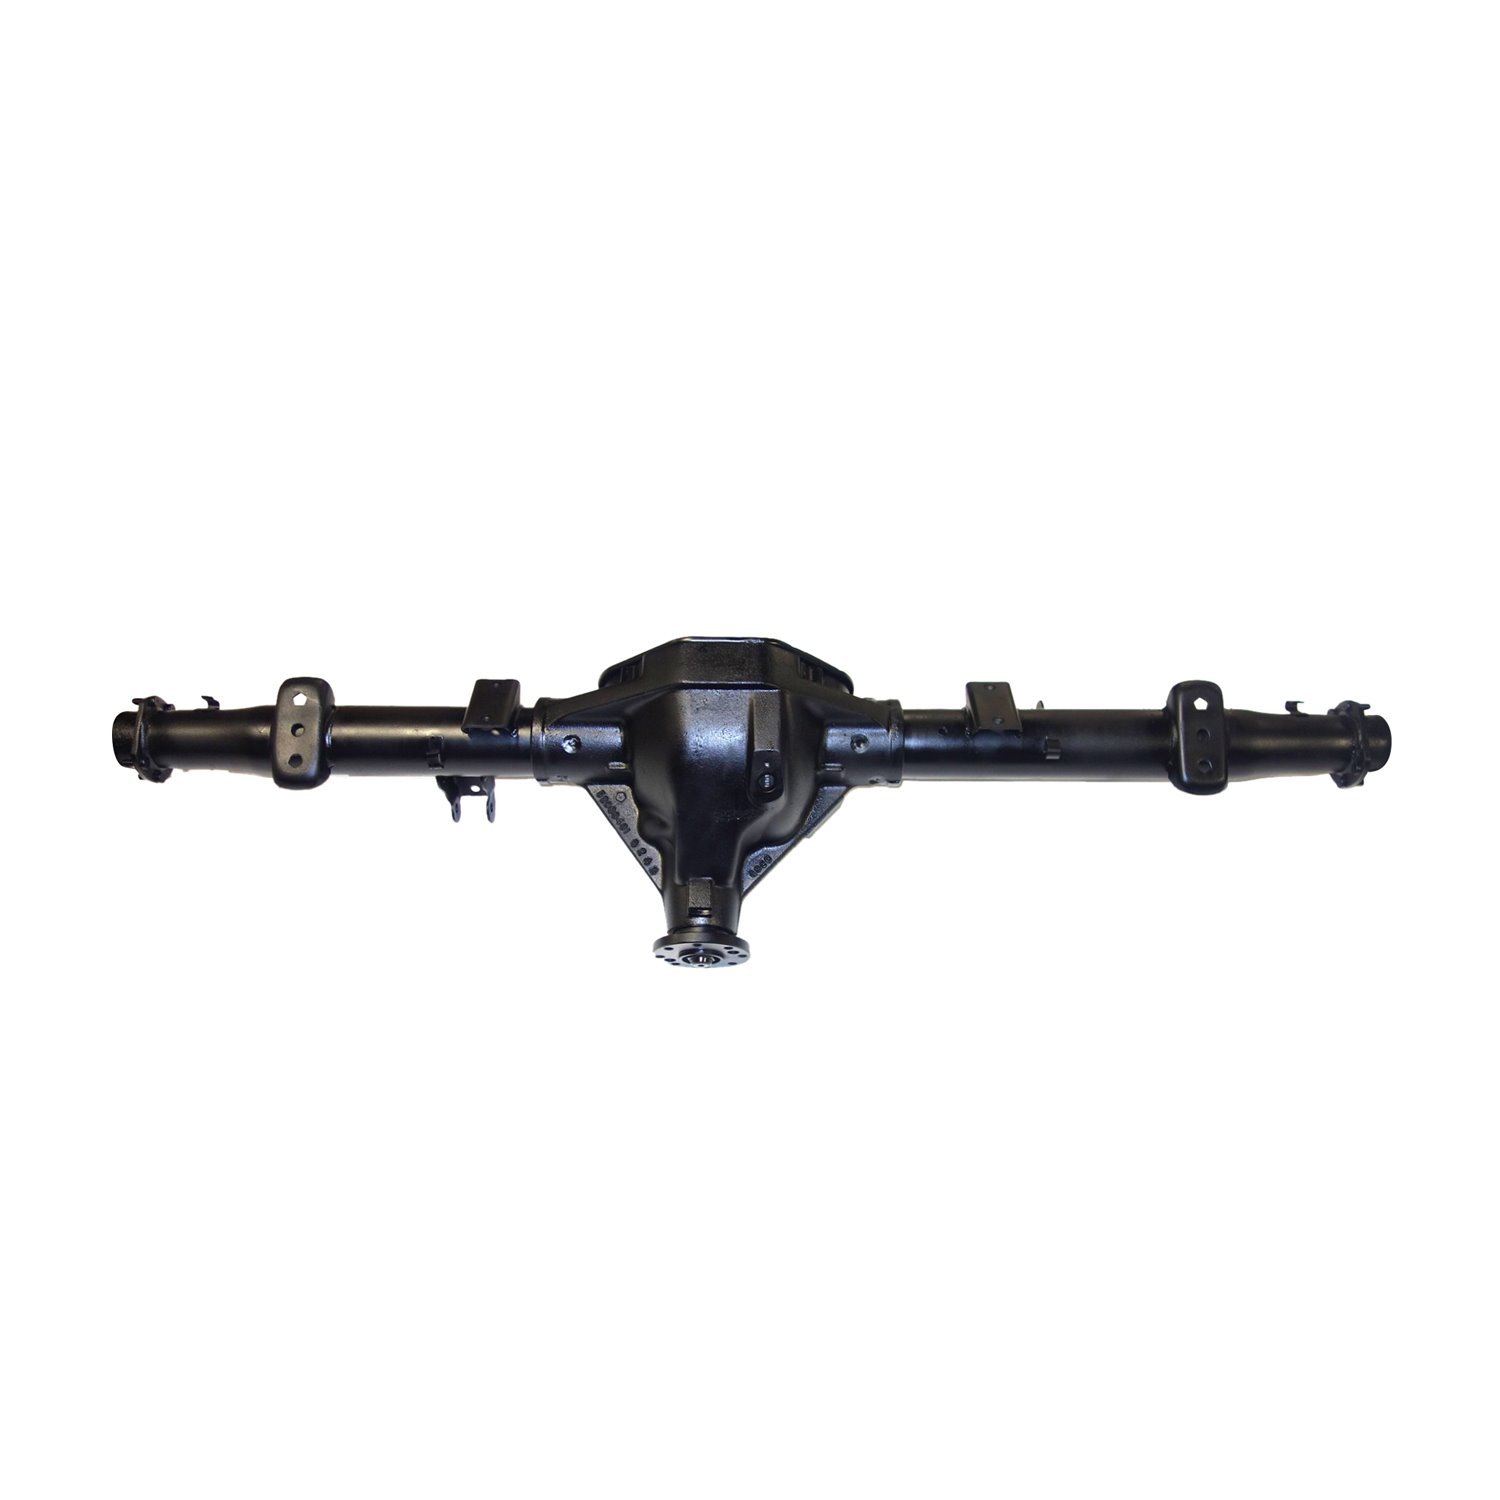 Remanufactured Axle Assy for Chy 9.25" 2006 Dodge Durango 3.92 , 4x4 w/ Traction Control